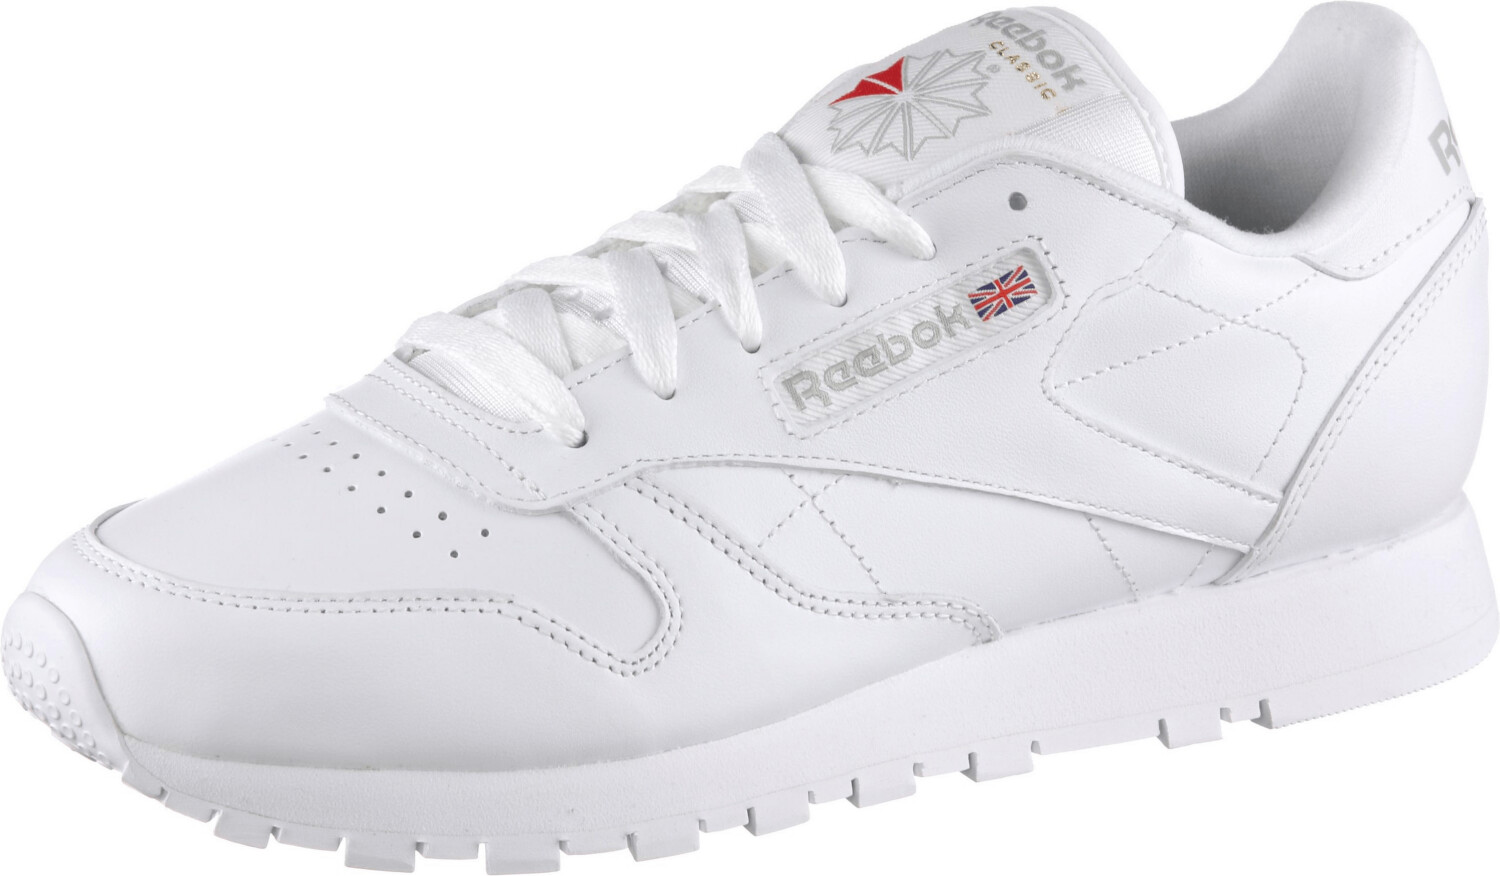 Buy Reebok Classic Leather Women all white from £22.00 (Today) – Best ...